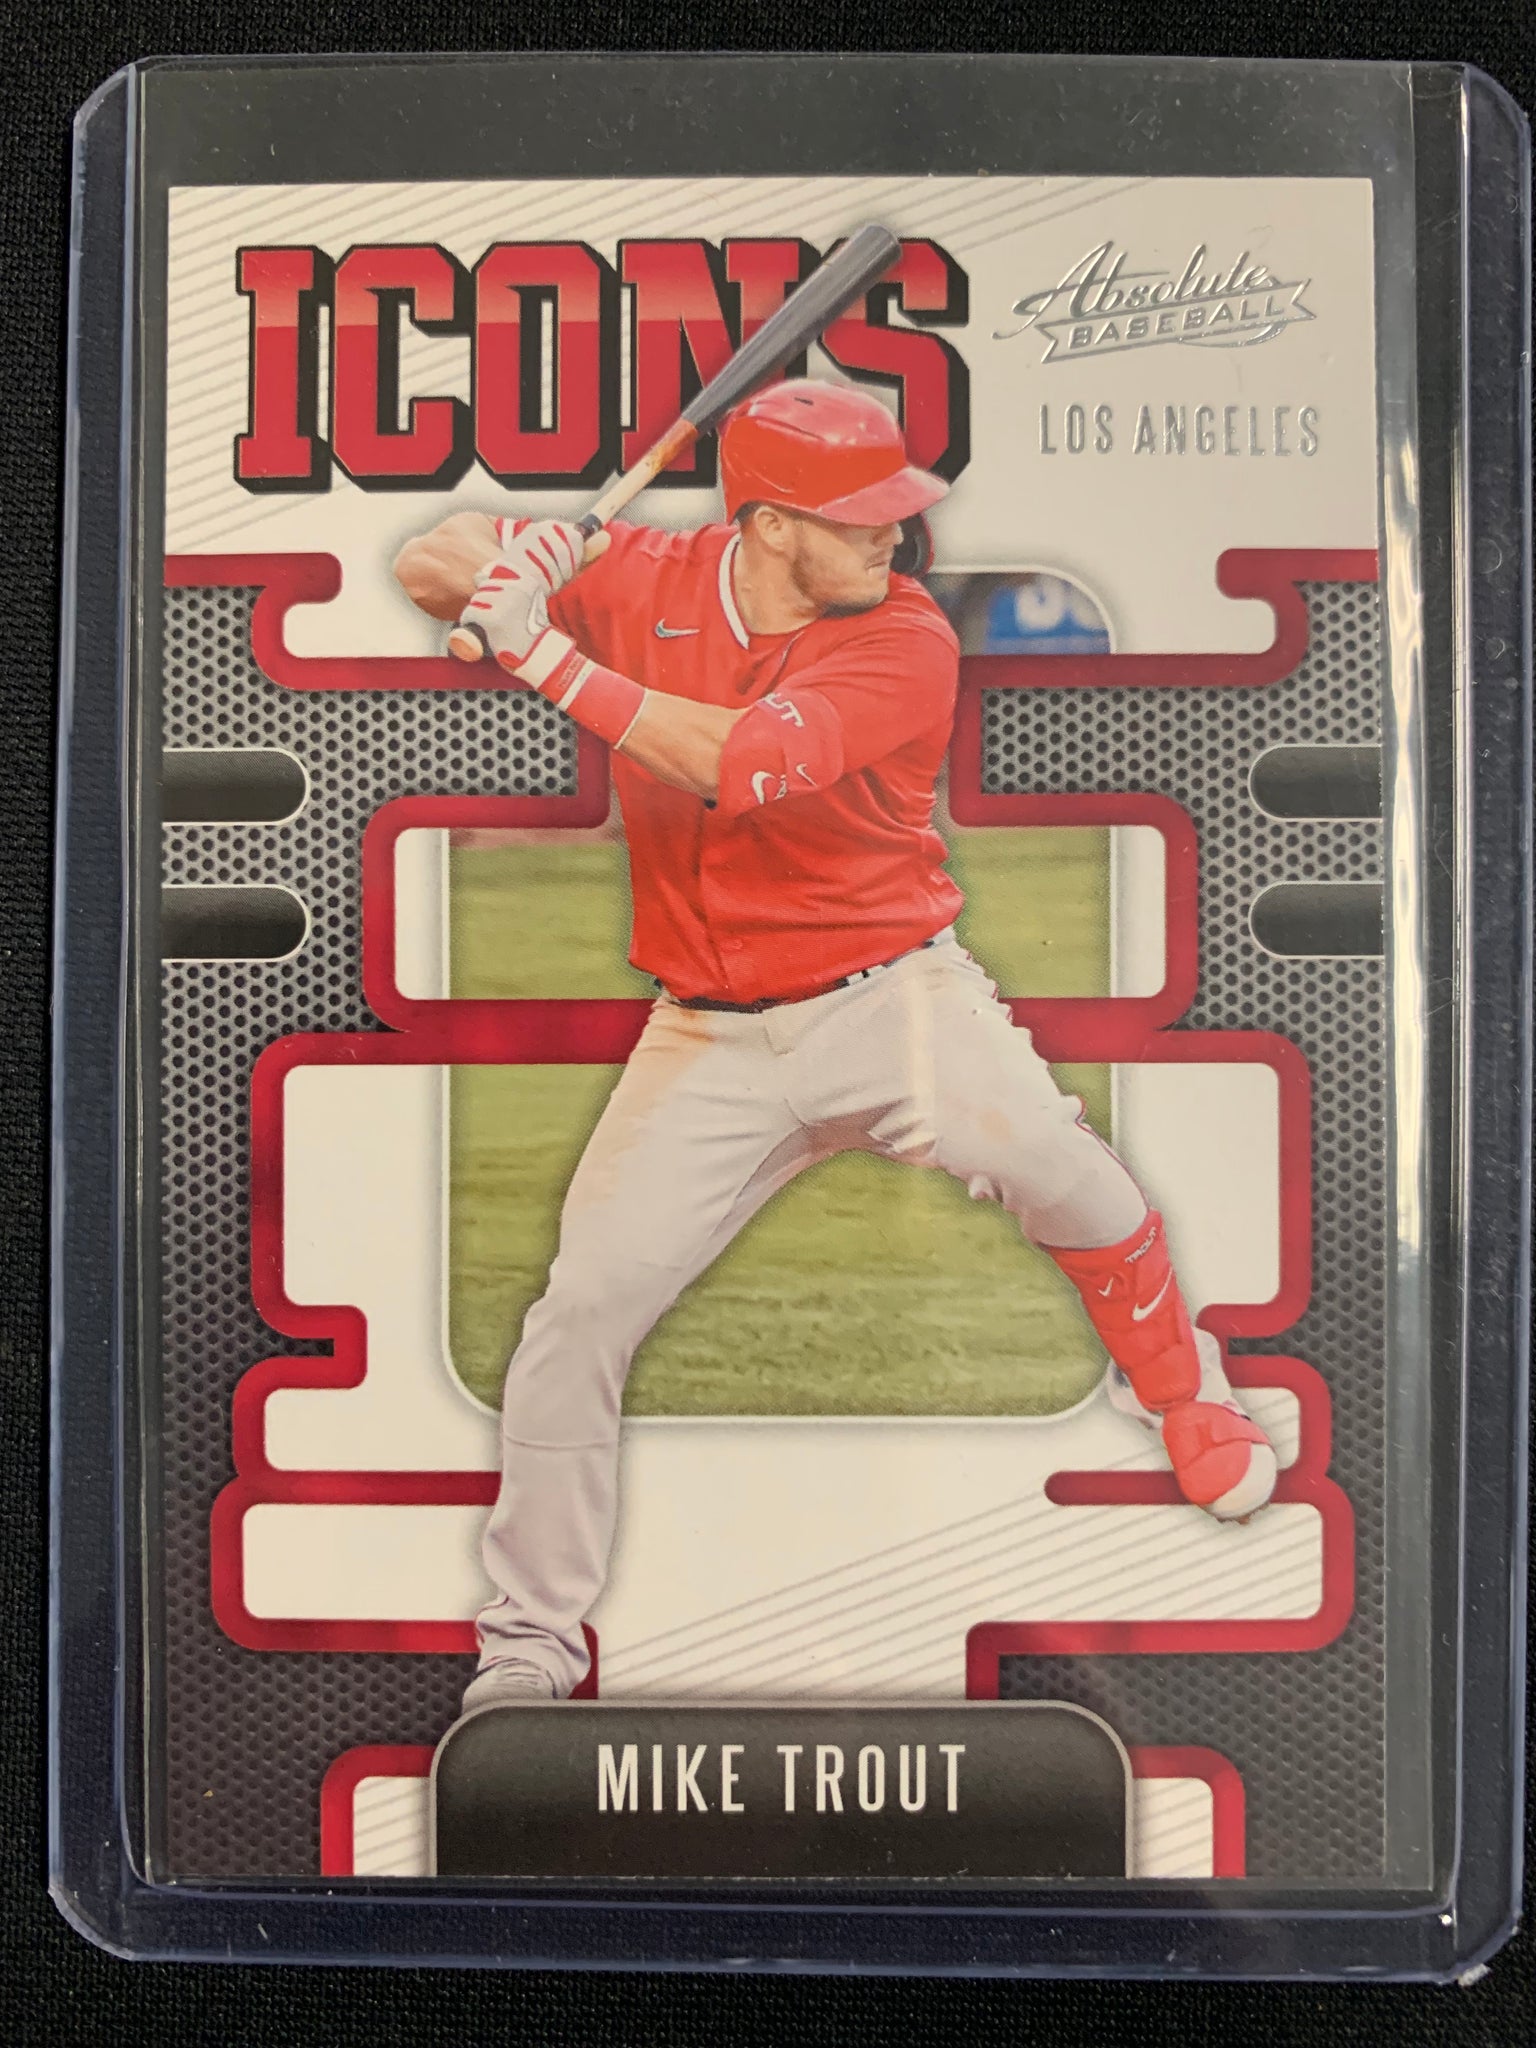 2021 PANINI ABSOLUTE BASEBALL #I-7 LOS ANGELES ANGELS - MIKE TROUT ICONS INSERT CARD